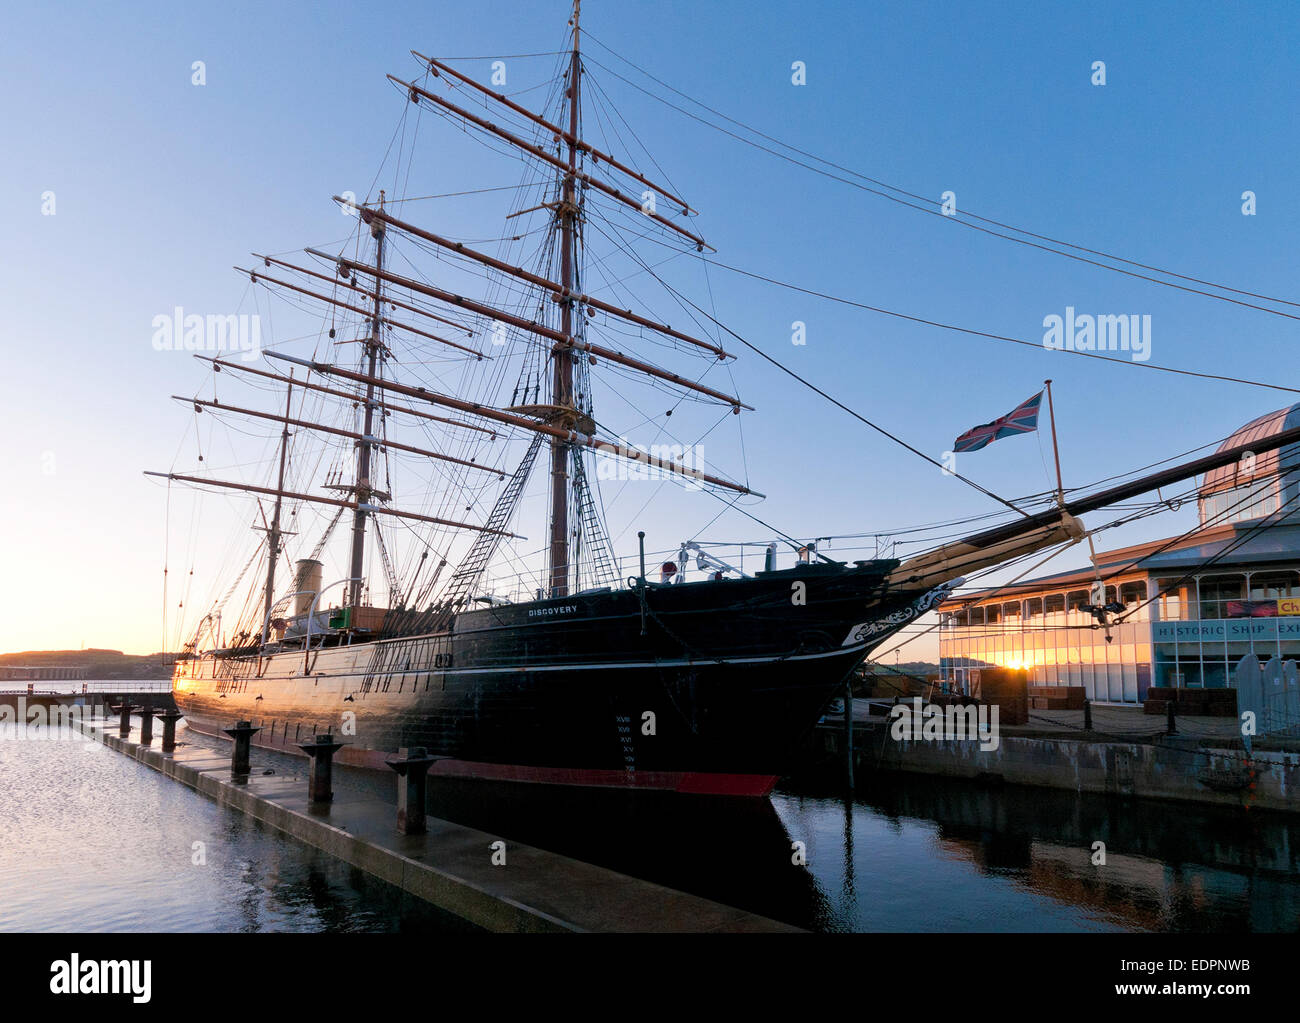 Rrs discovery point dundee centro visita museo crepuscolo Foto Stock